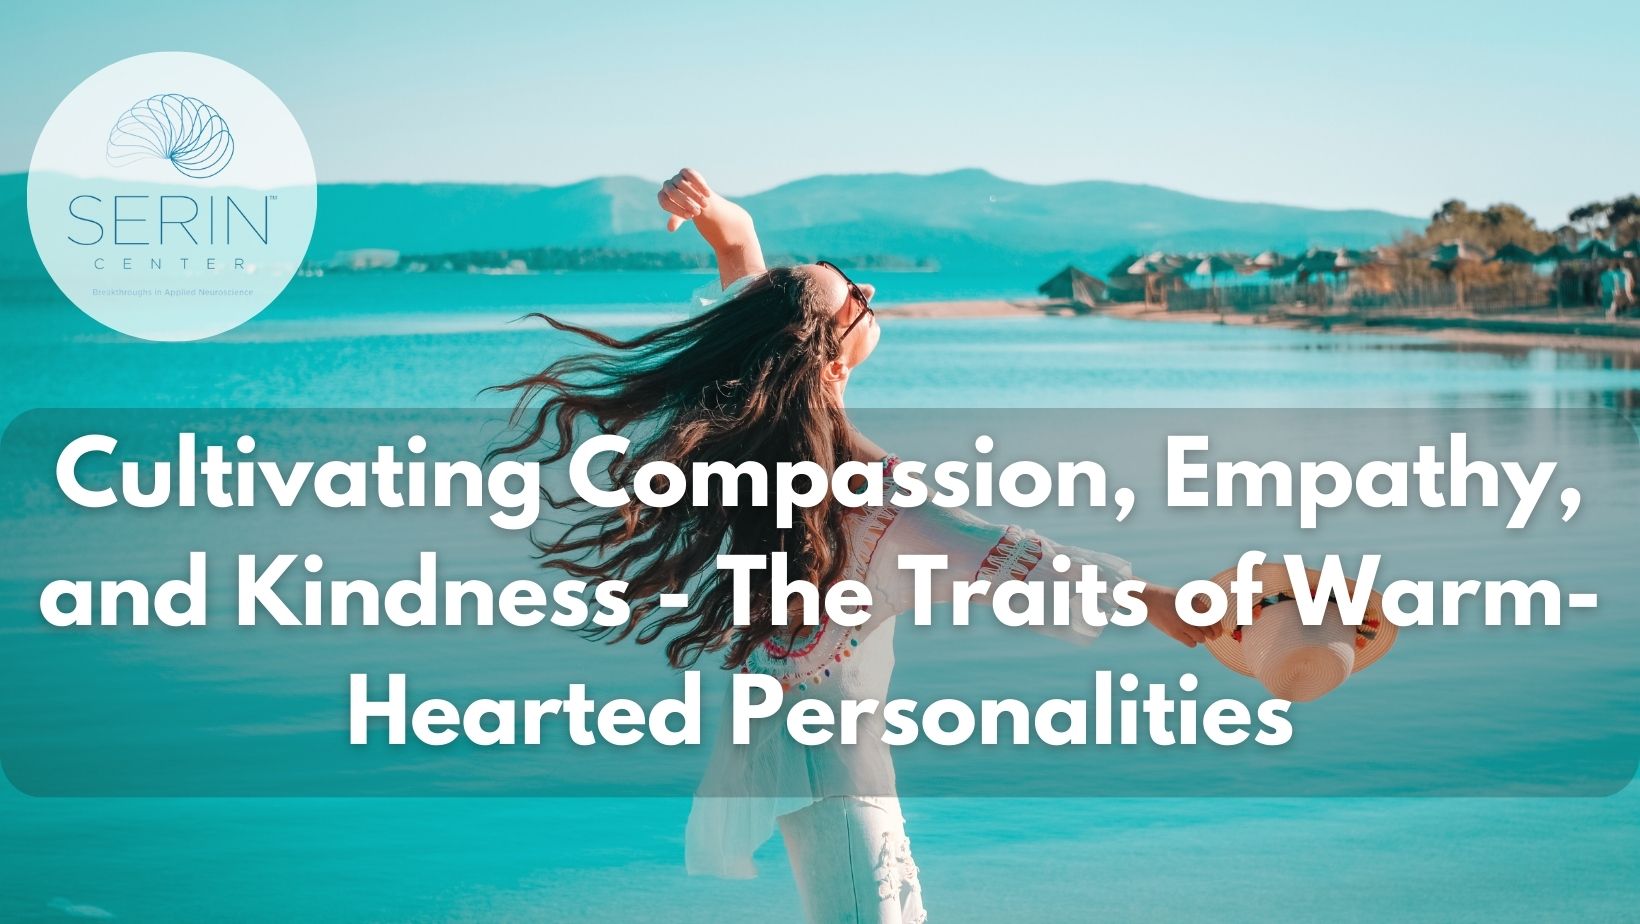 11 Traits of Warm-Hearted Personalities - Serin Center